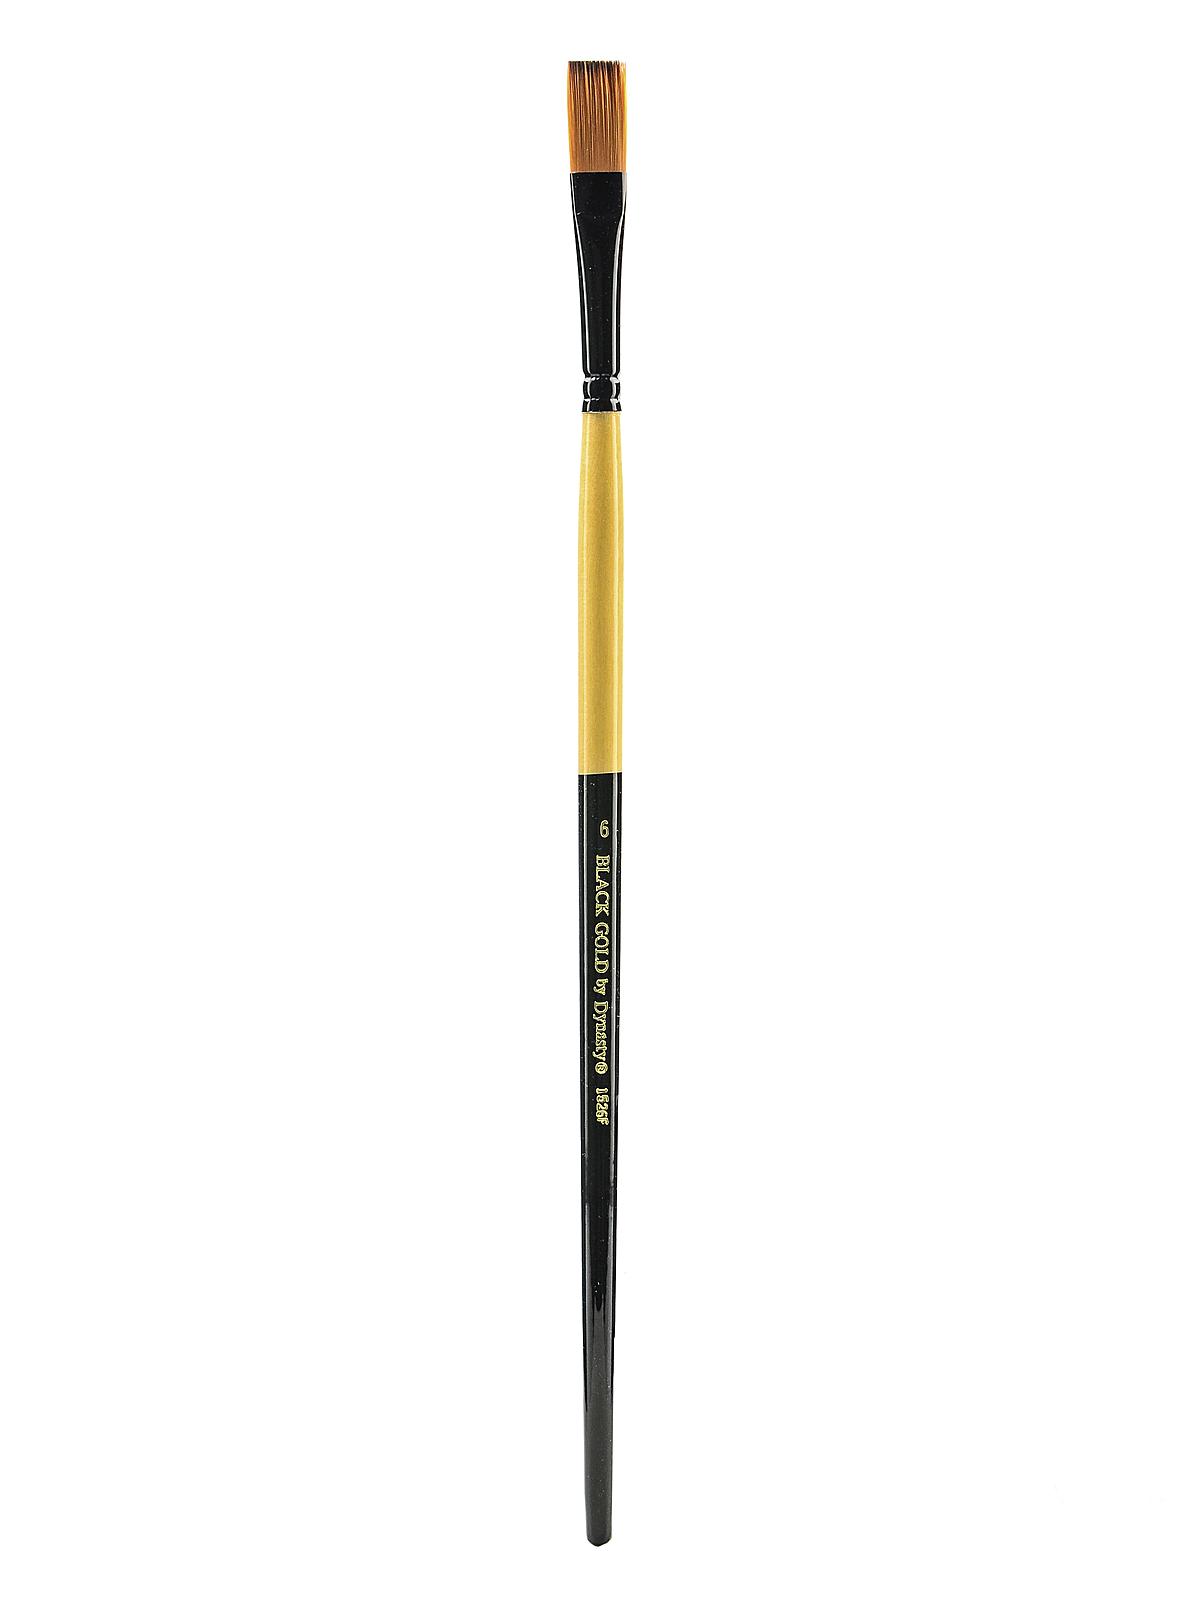 Black Gold Series Long Handled Synthetic Brushes 6 Flat 1526F